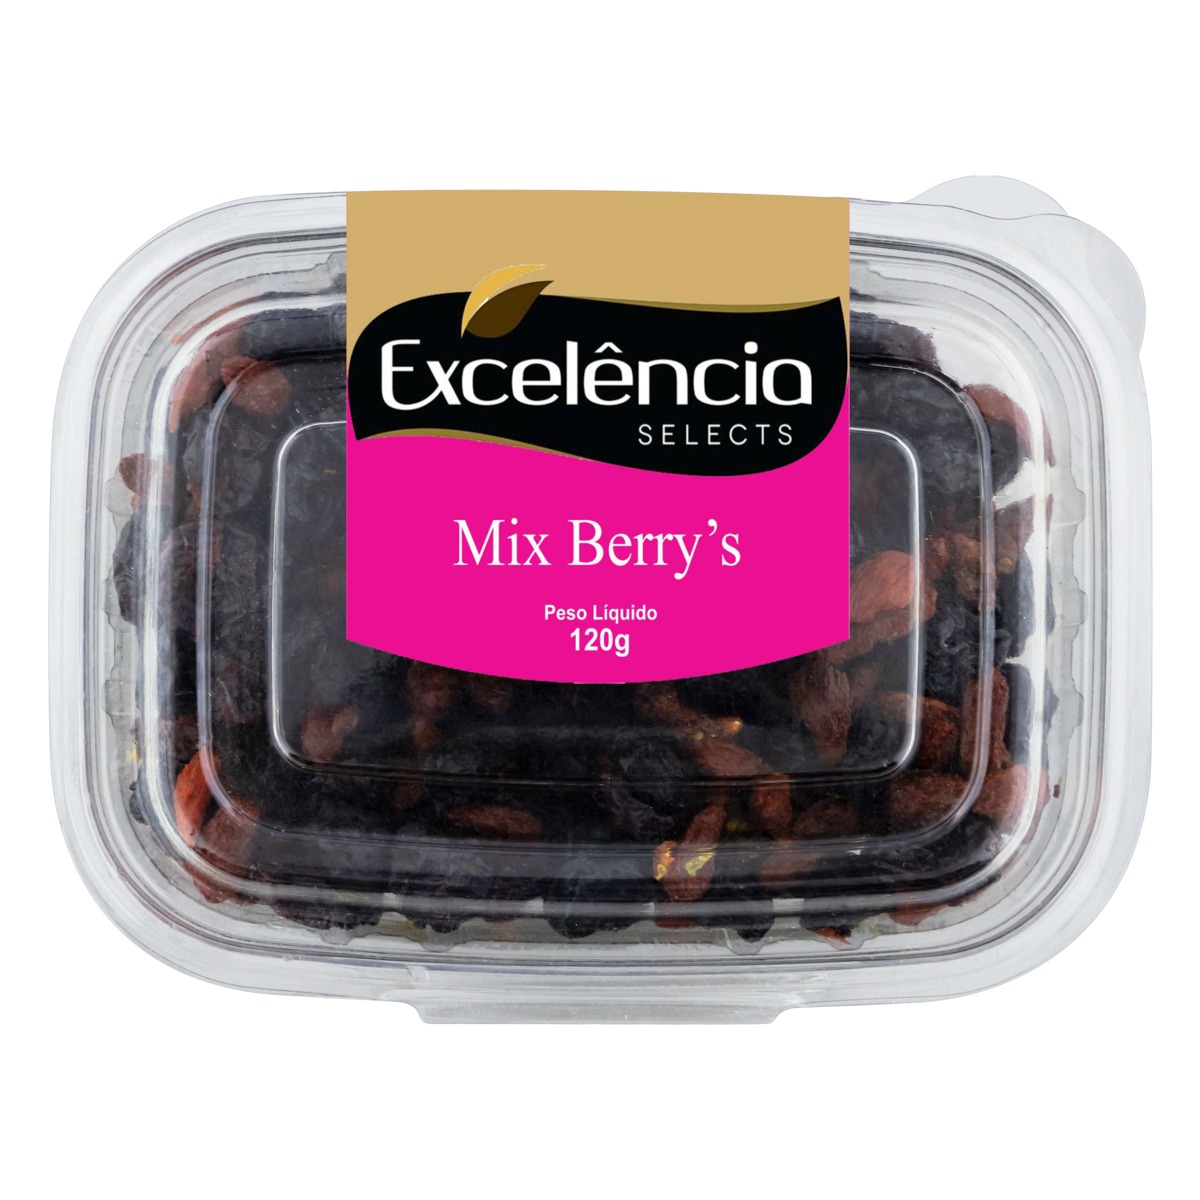 7898928927041 - MIX BERRY’S EXCELÊNCIA SELECTS POTE 120G